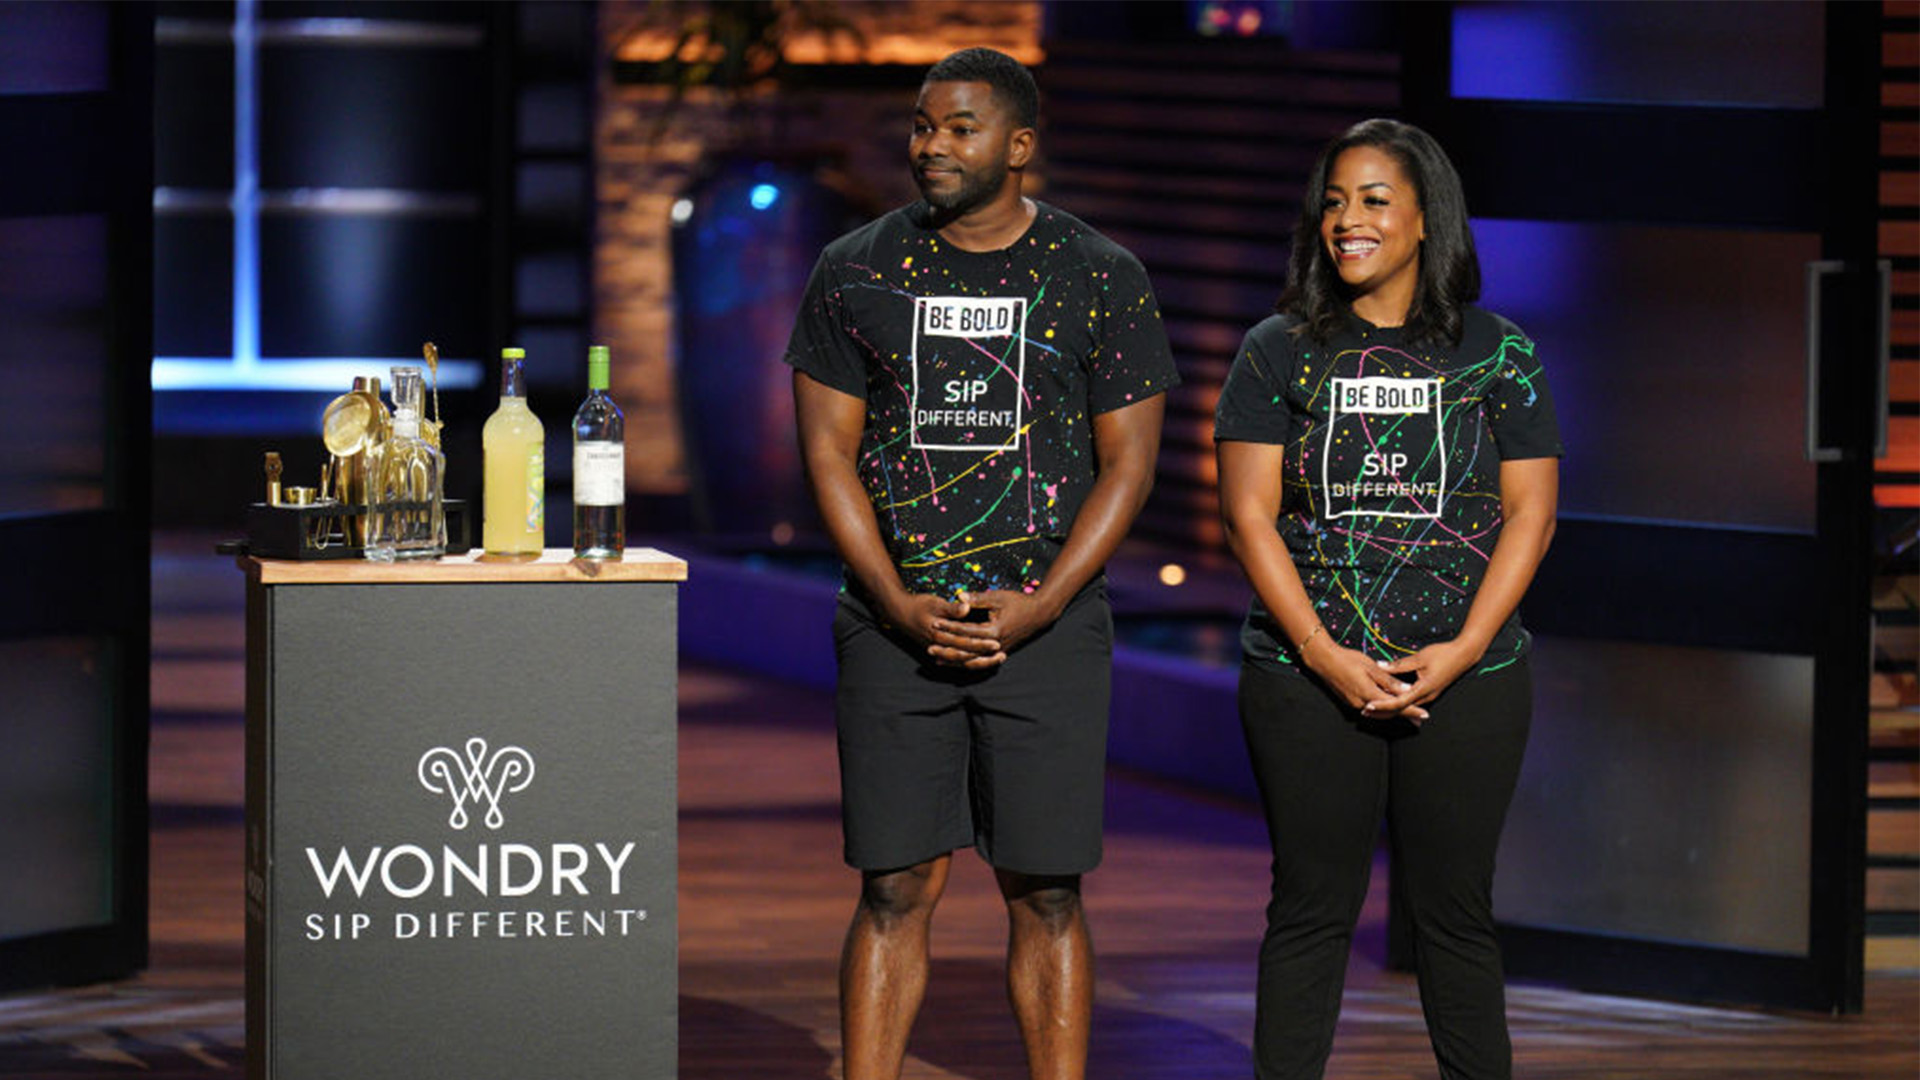 Black-Owned Wondry Quadruples Sales To $1.1M Less Than 1 Year After Being Backed By Mark Cuban On 'Shark Tank'